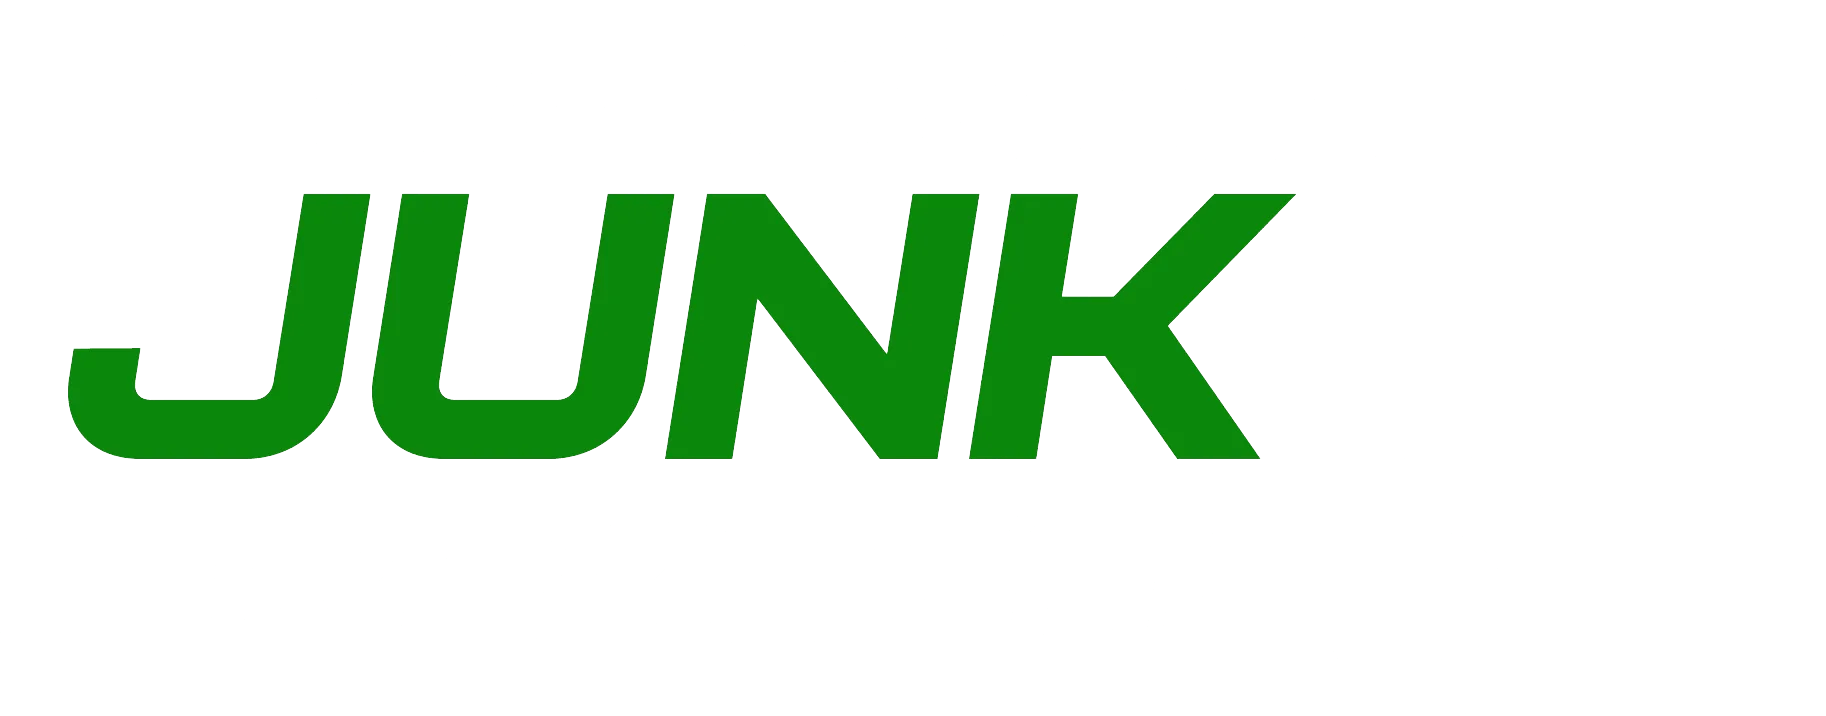 Oneonta Junk Removal, best junk removal company near me, otsego county ny